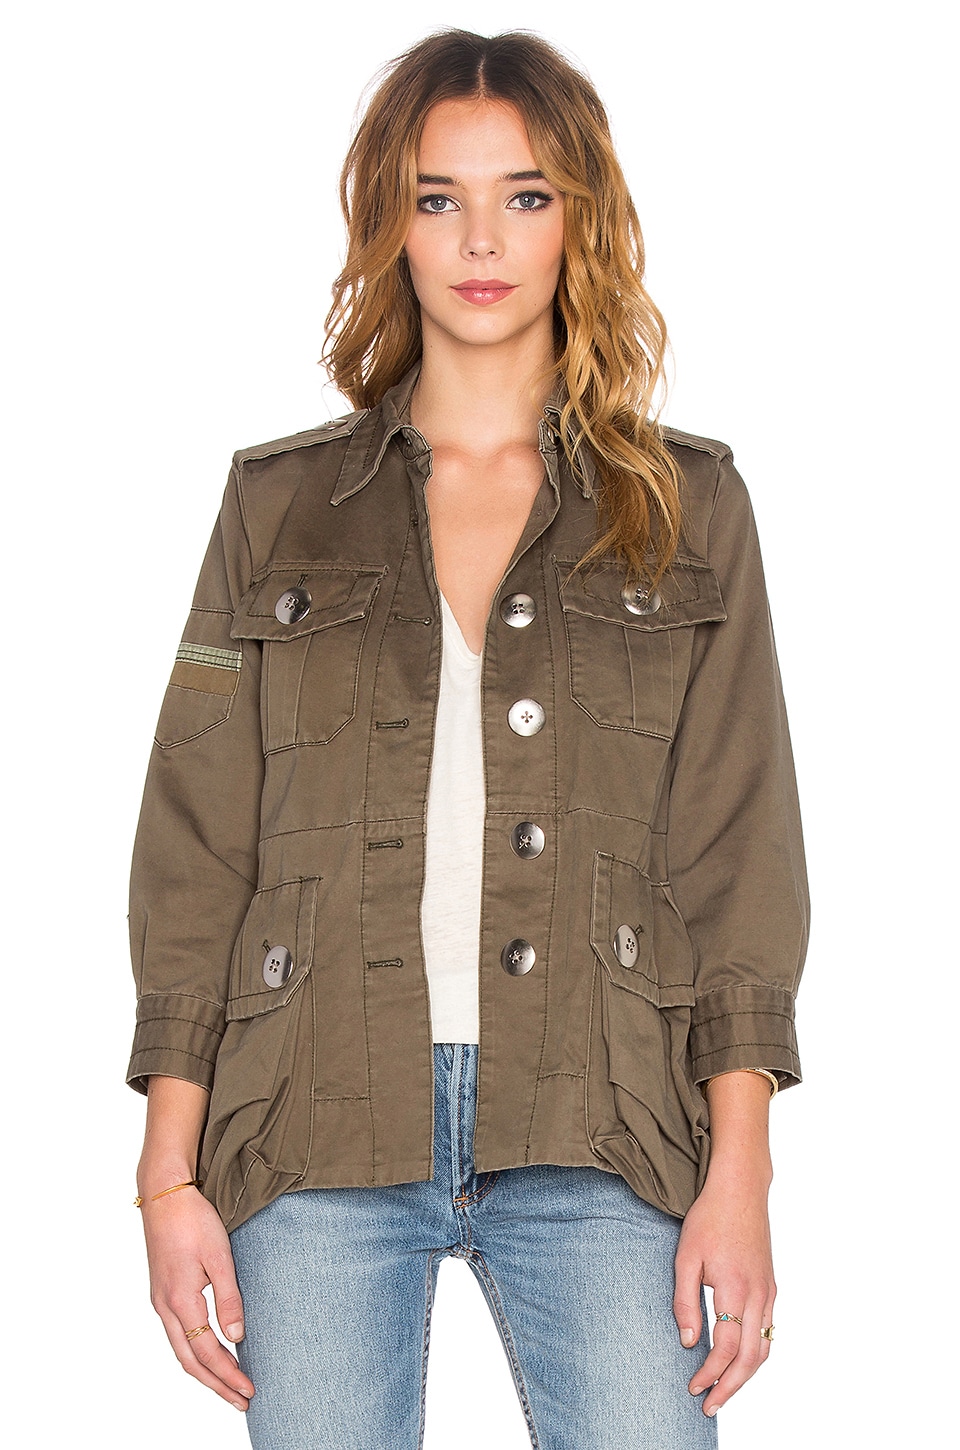 Marc by Marc Jacobs Cotton Twill Military Jacket in Sully Green | REVOLVE